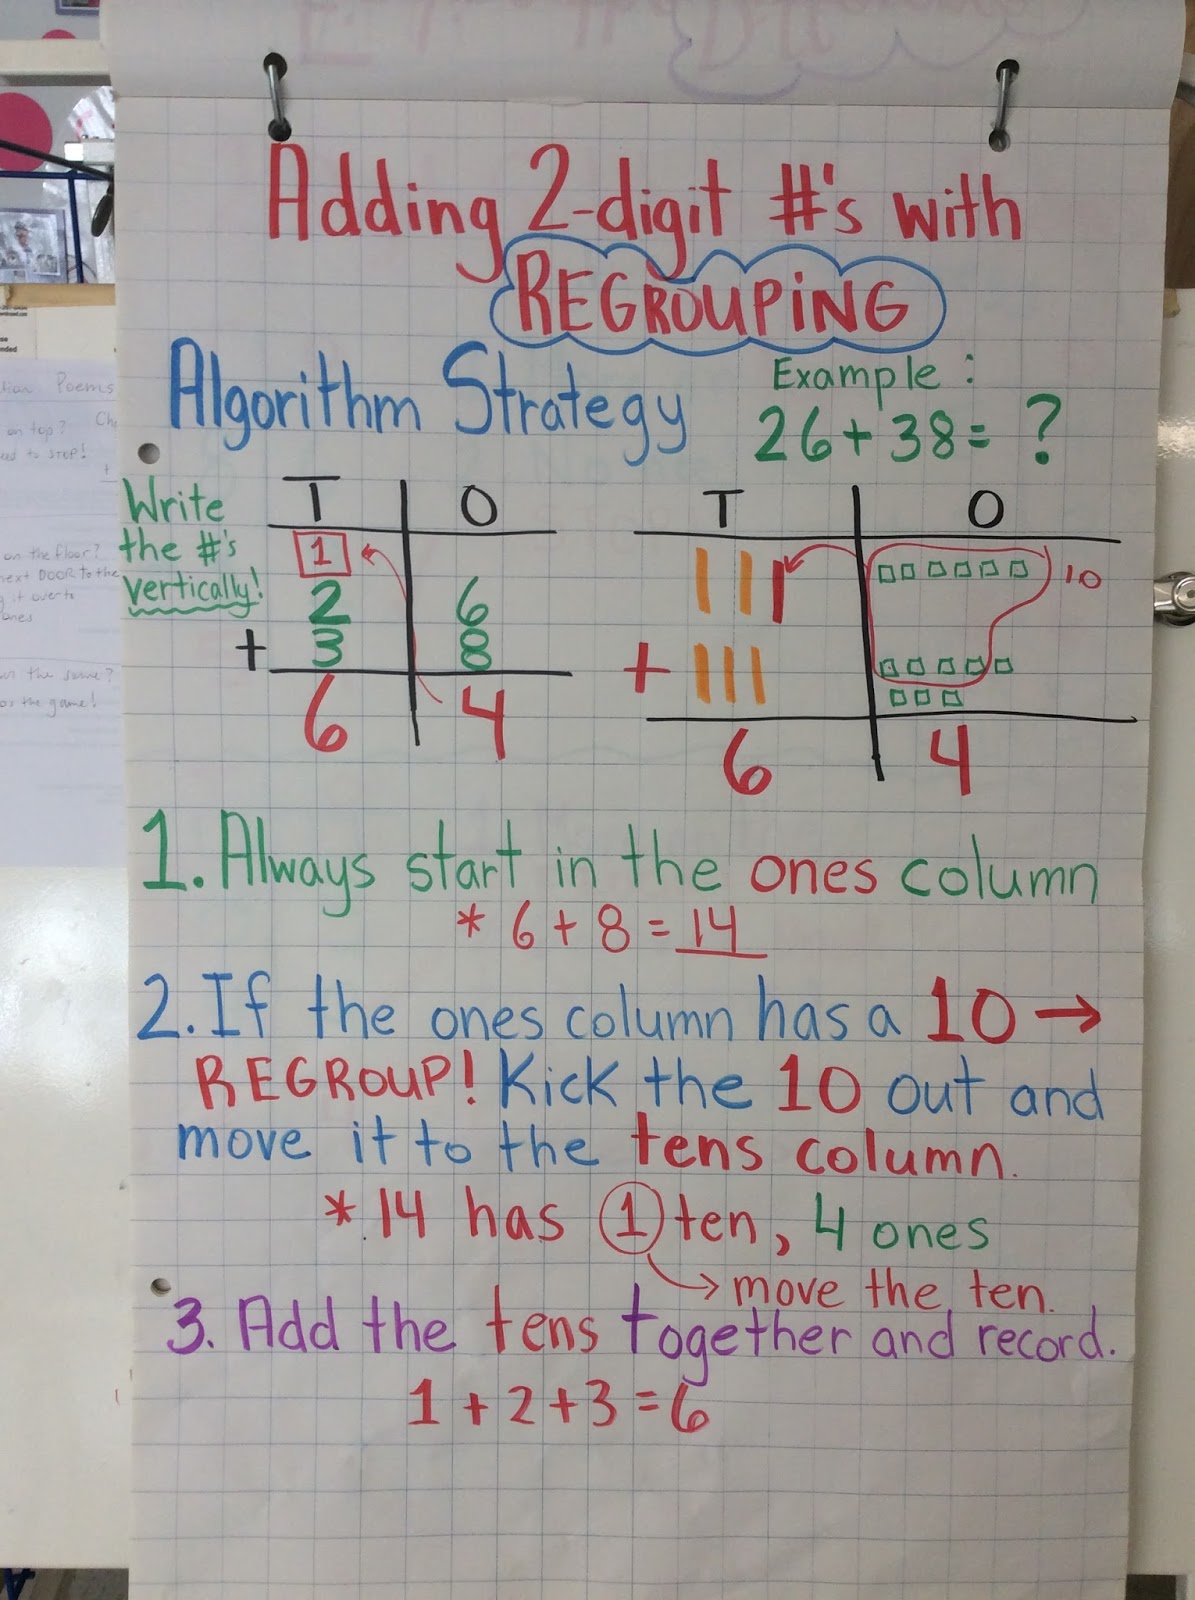 Addition With Regrouping Anchor Chart